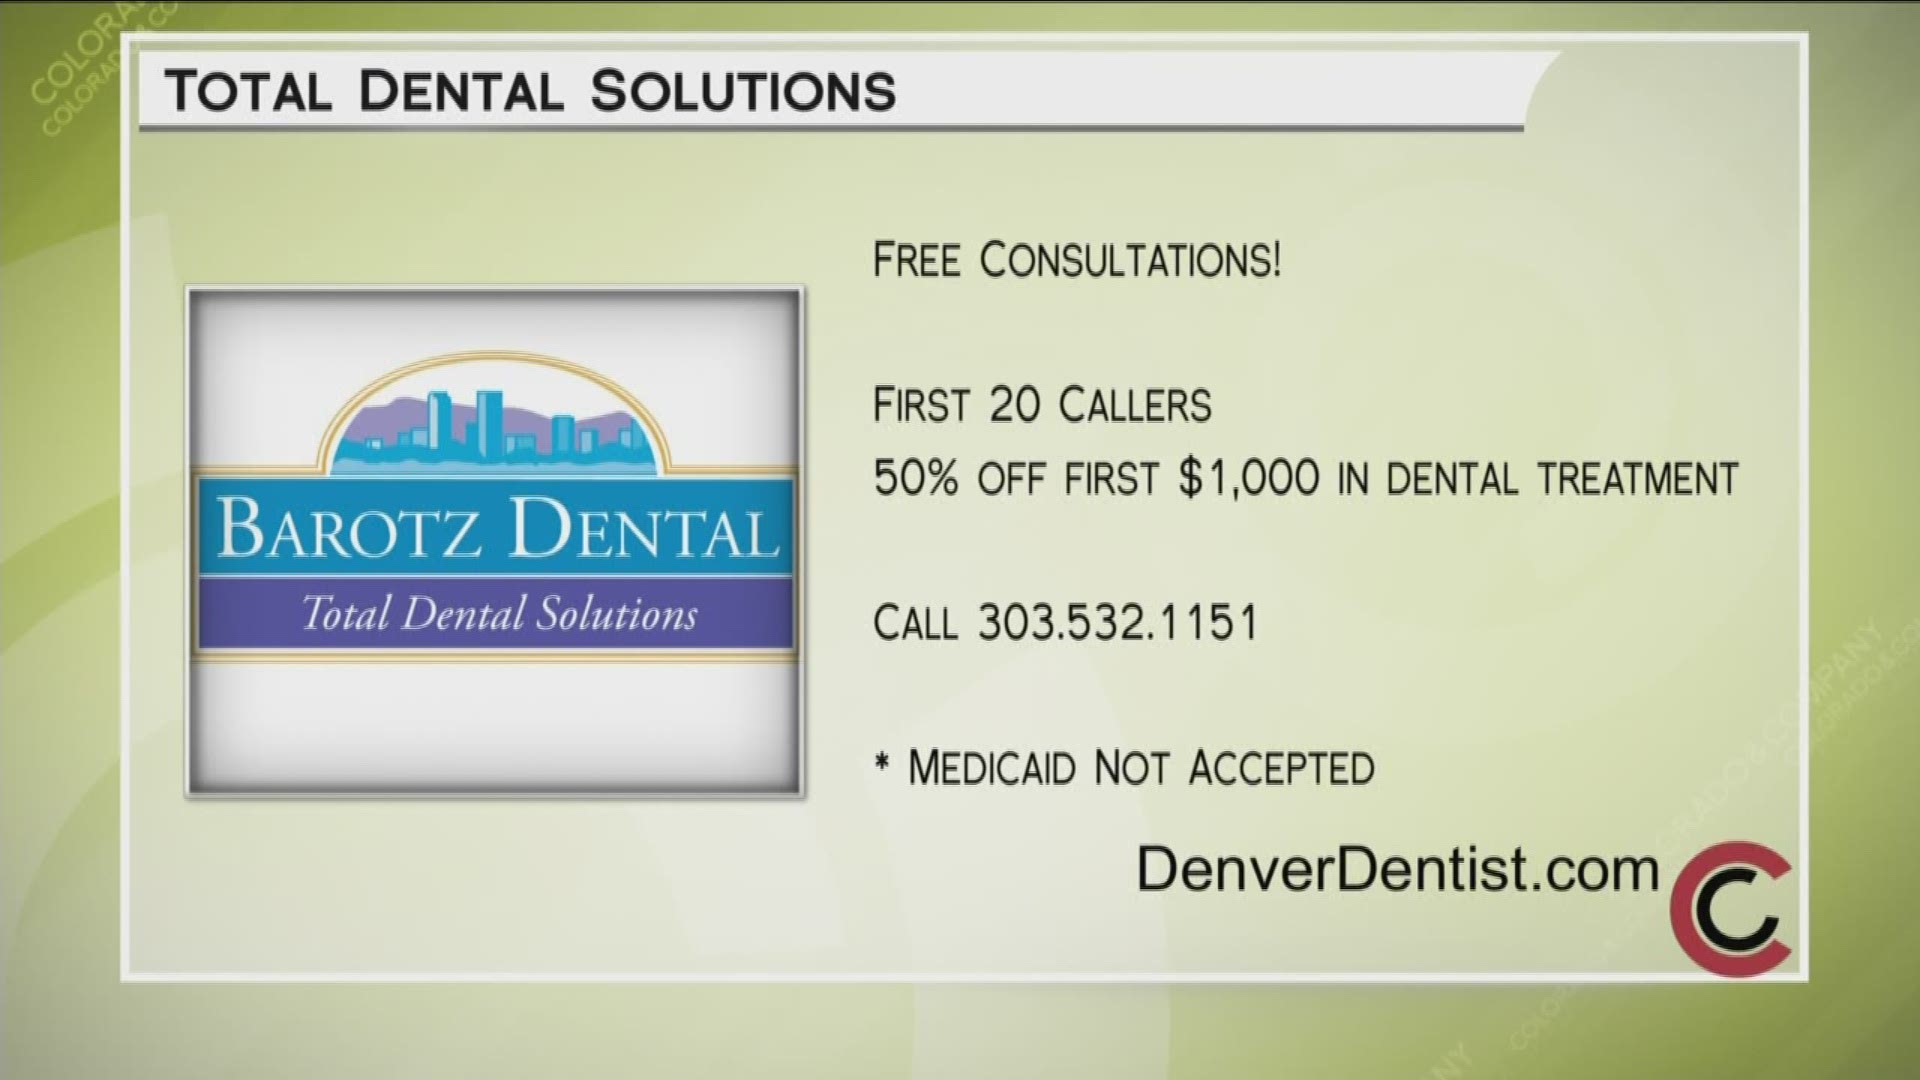 The first 20 callers to 303.532.1151 for 50% off your first $1,000 in dental treatment. Learn more at DenverDentist.com.